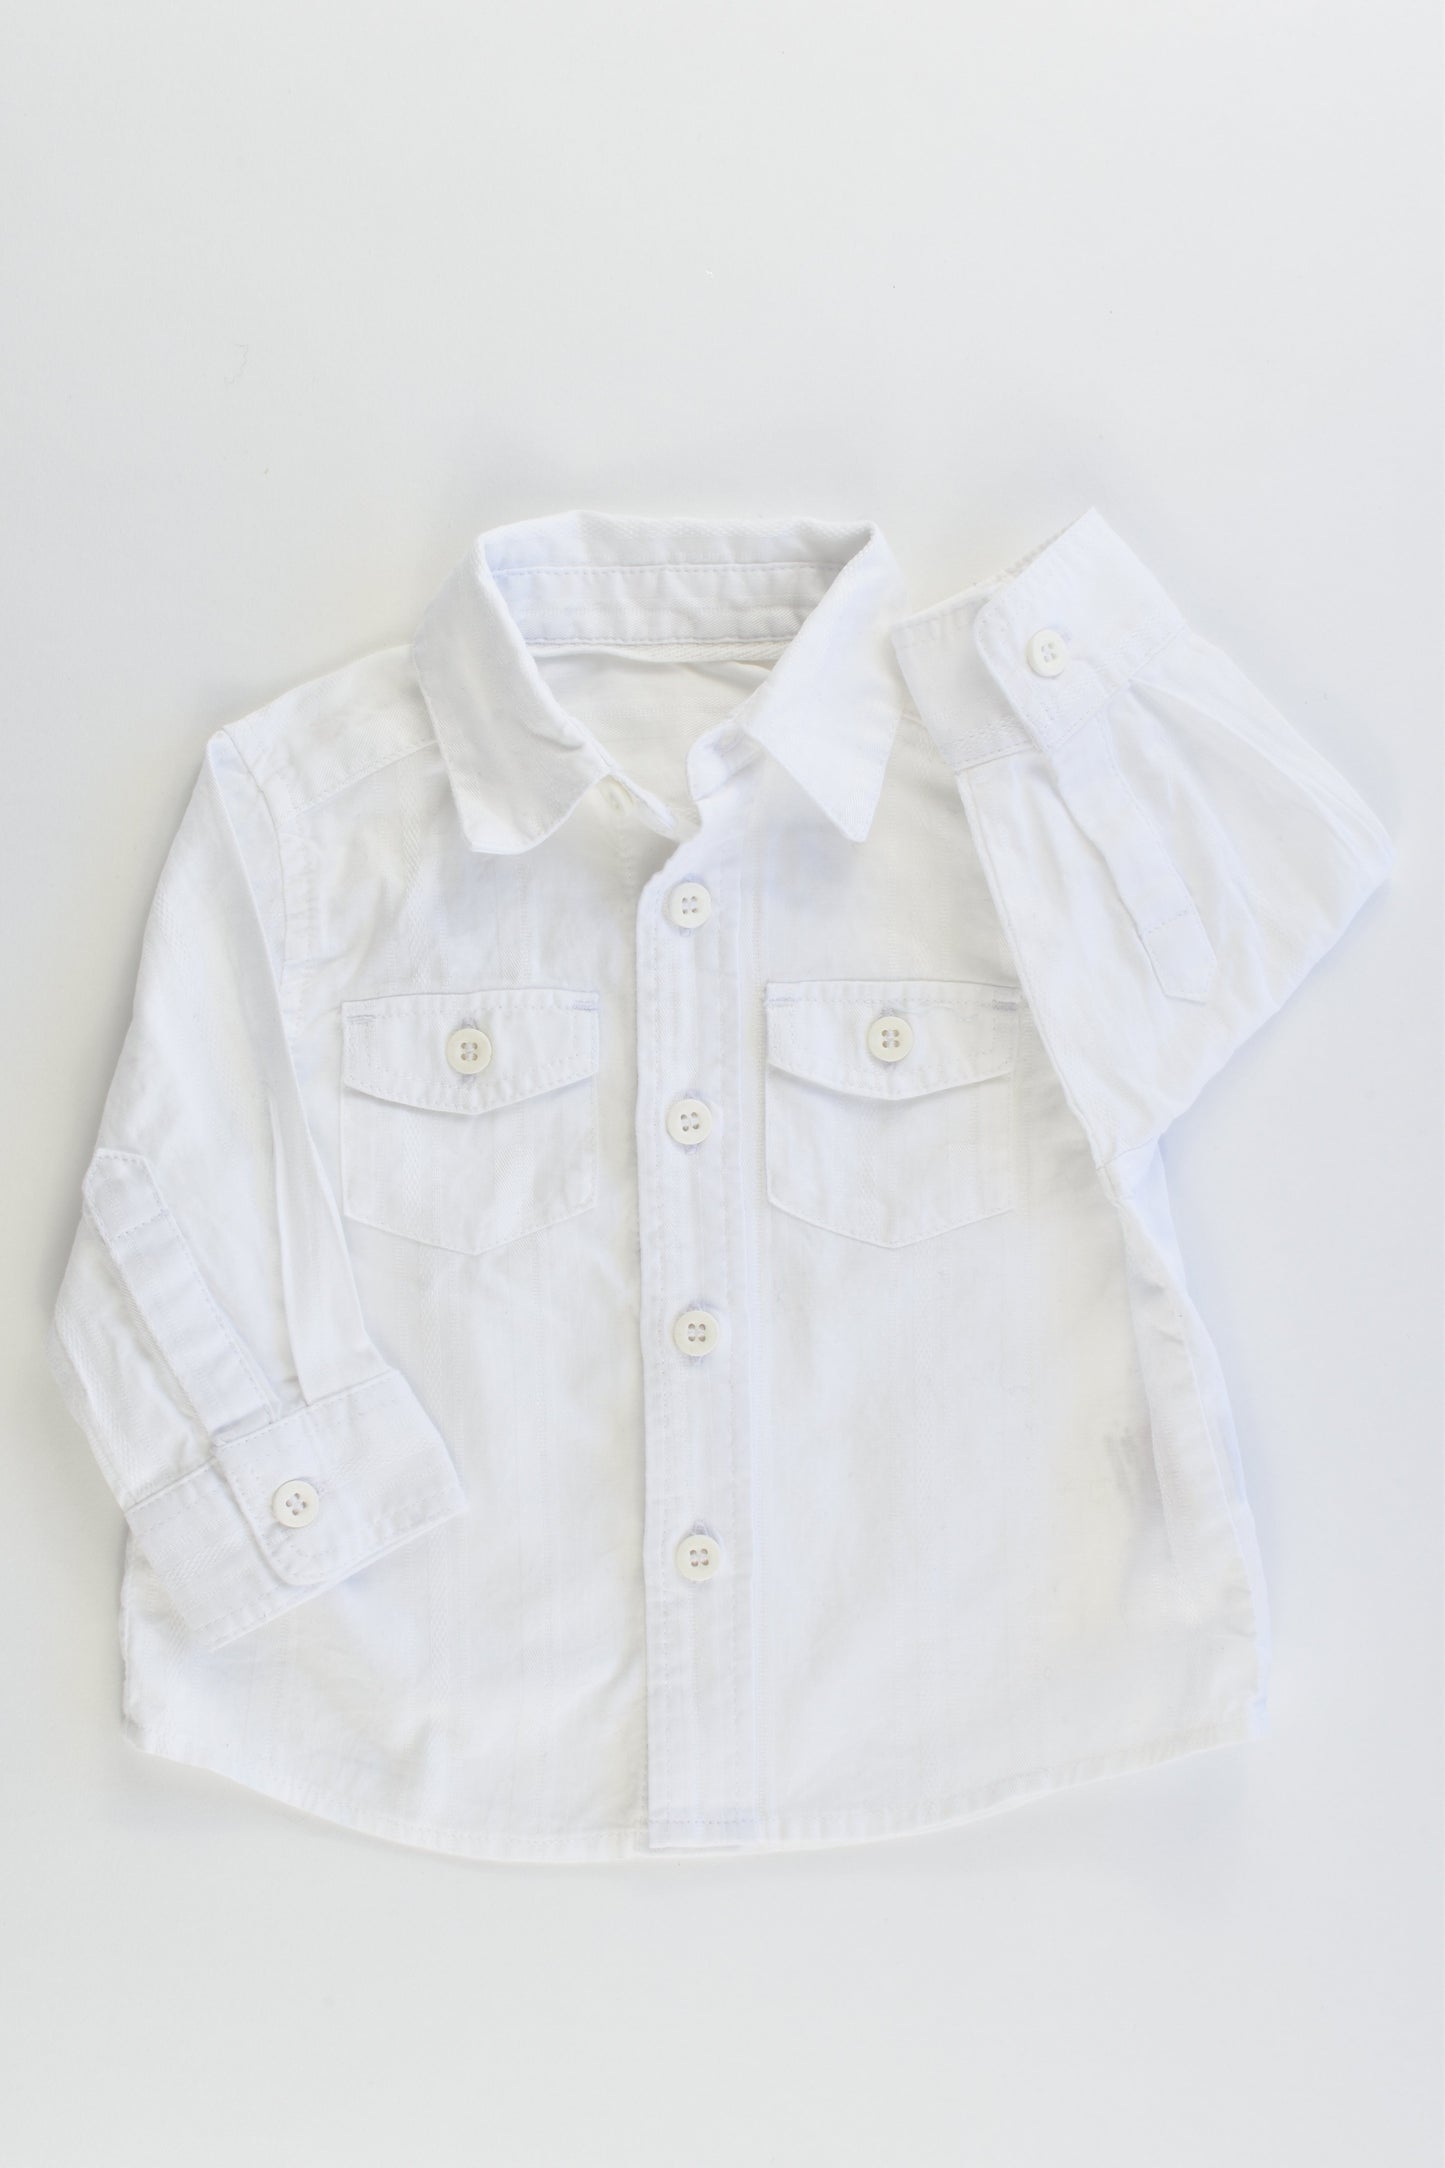 Mothercare Size 00 (3-6 months) Collared Shirt